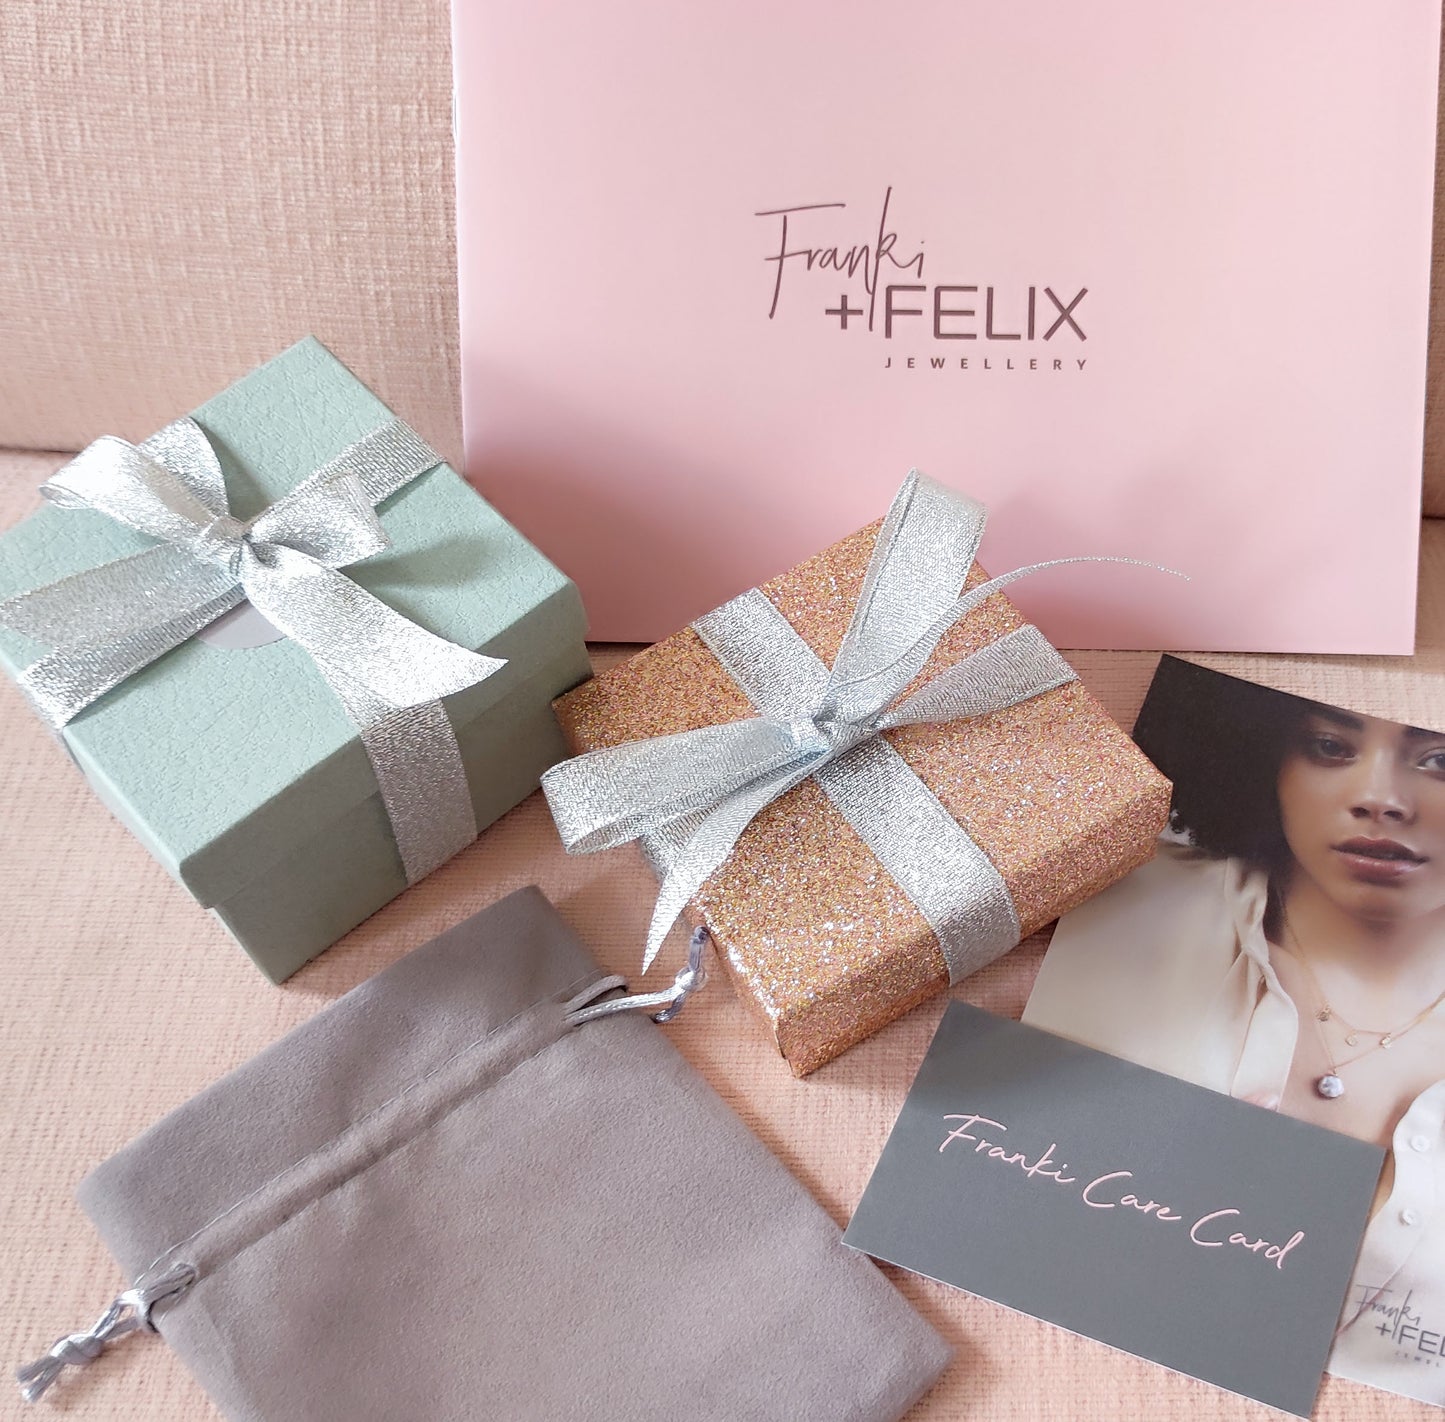 gift wrapping grey box and rose gold glitter box and catalogue franki & felix jewellery